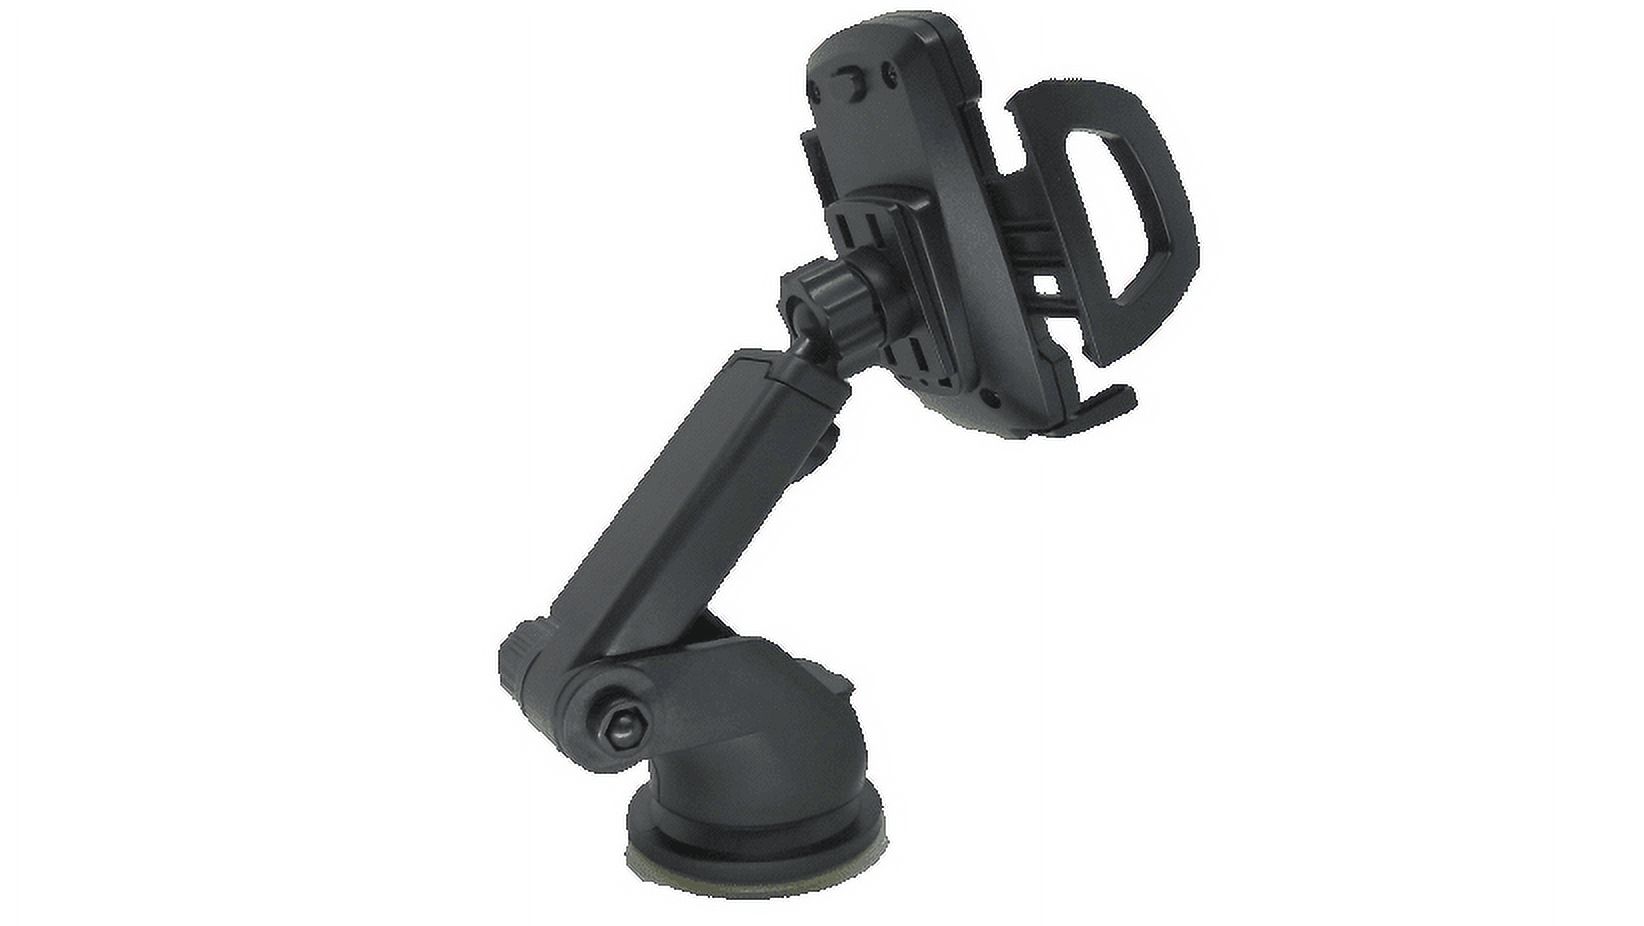 Can-Am Universal Vehicle Dash & Windshield Mount - Black. Car mount, truck mount, vehicle mount, cell phone car mount, car cradle, car cell phone holder - image 2 of 4